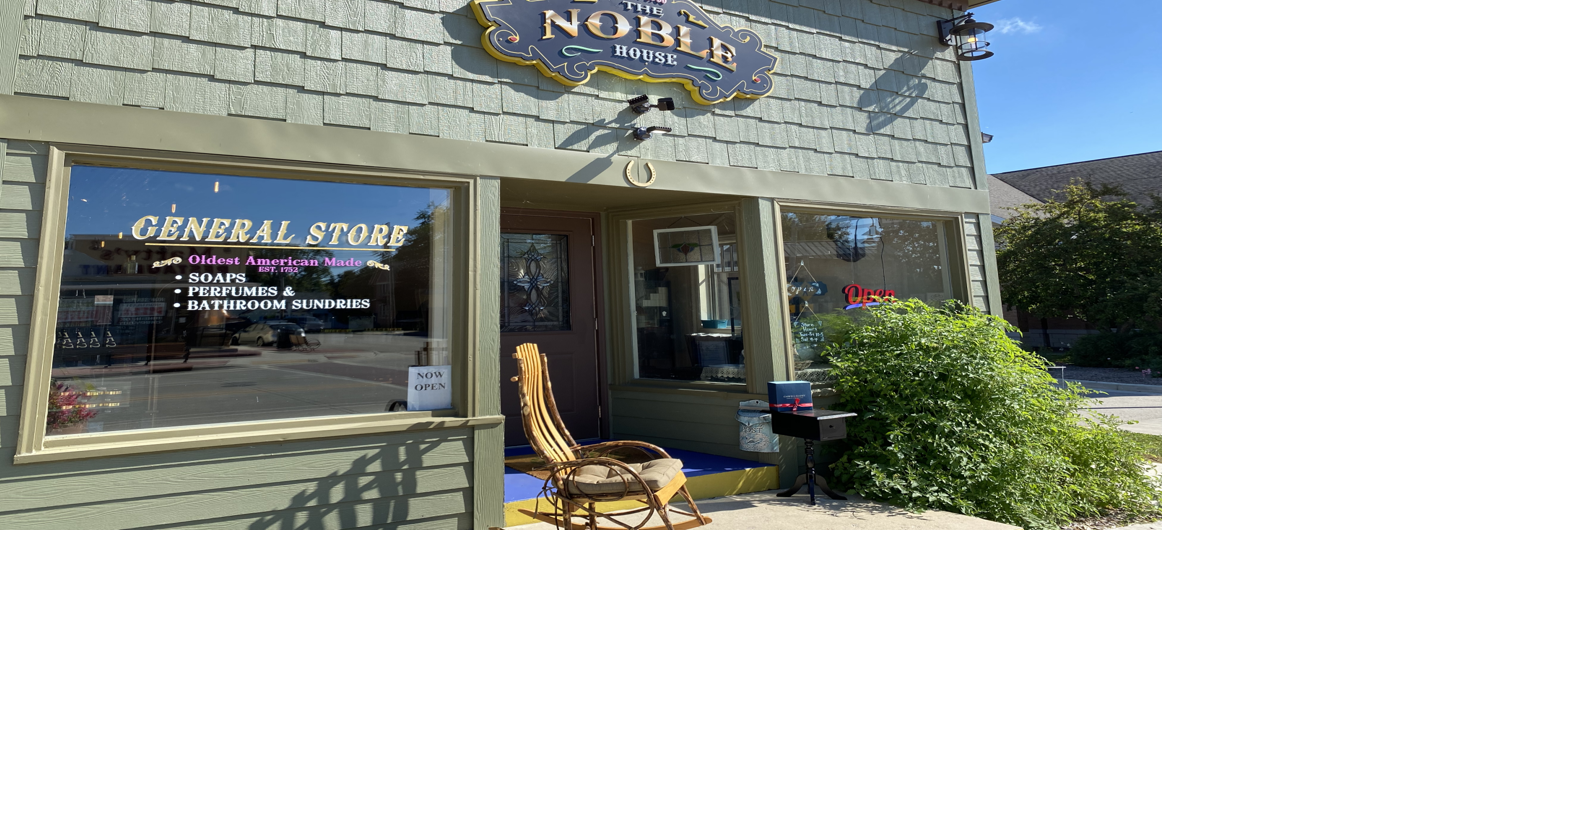 Shopping at The Noble House in Downtown Waterford is like walking through history | Local News